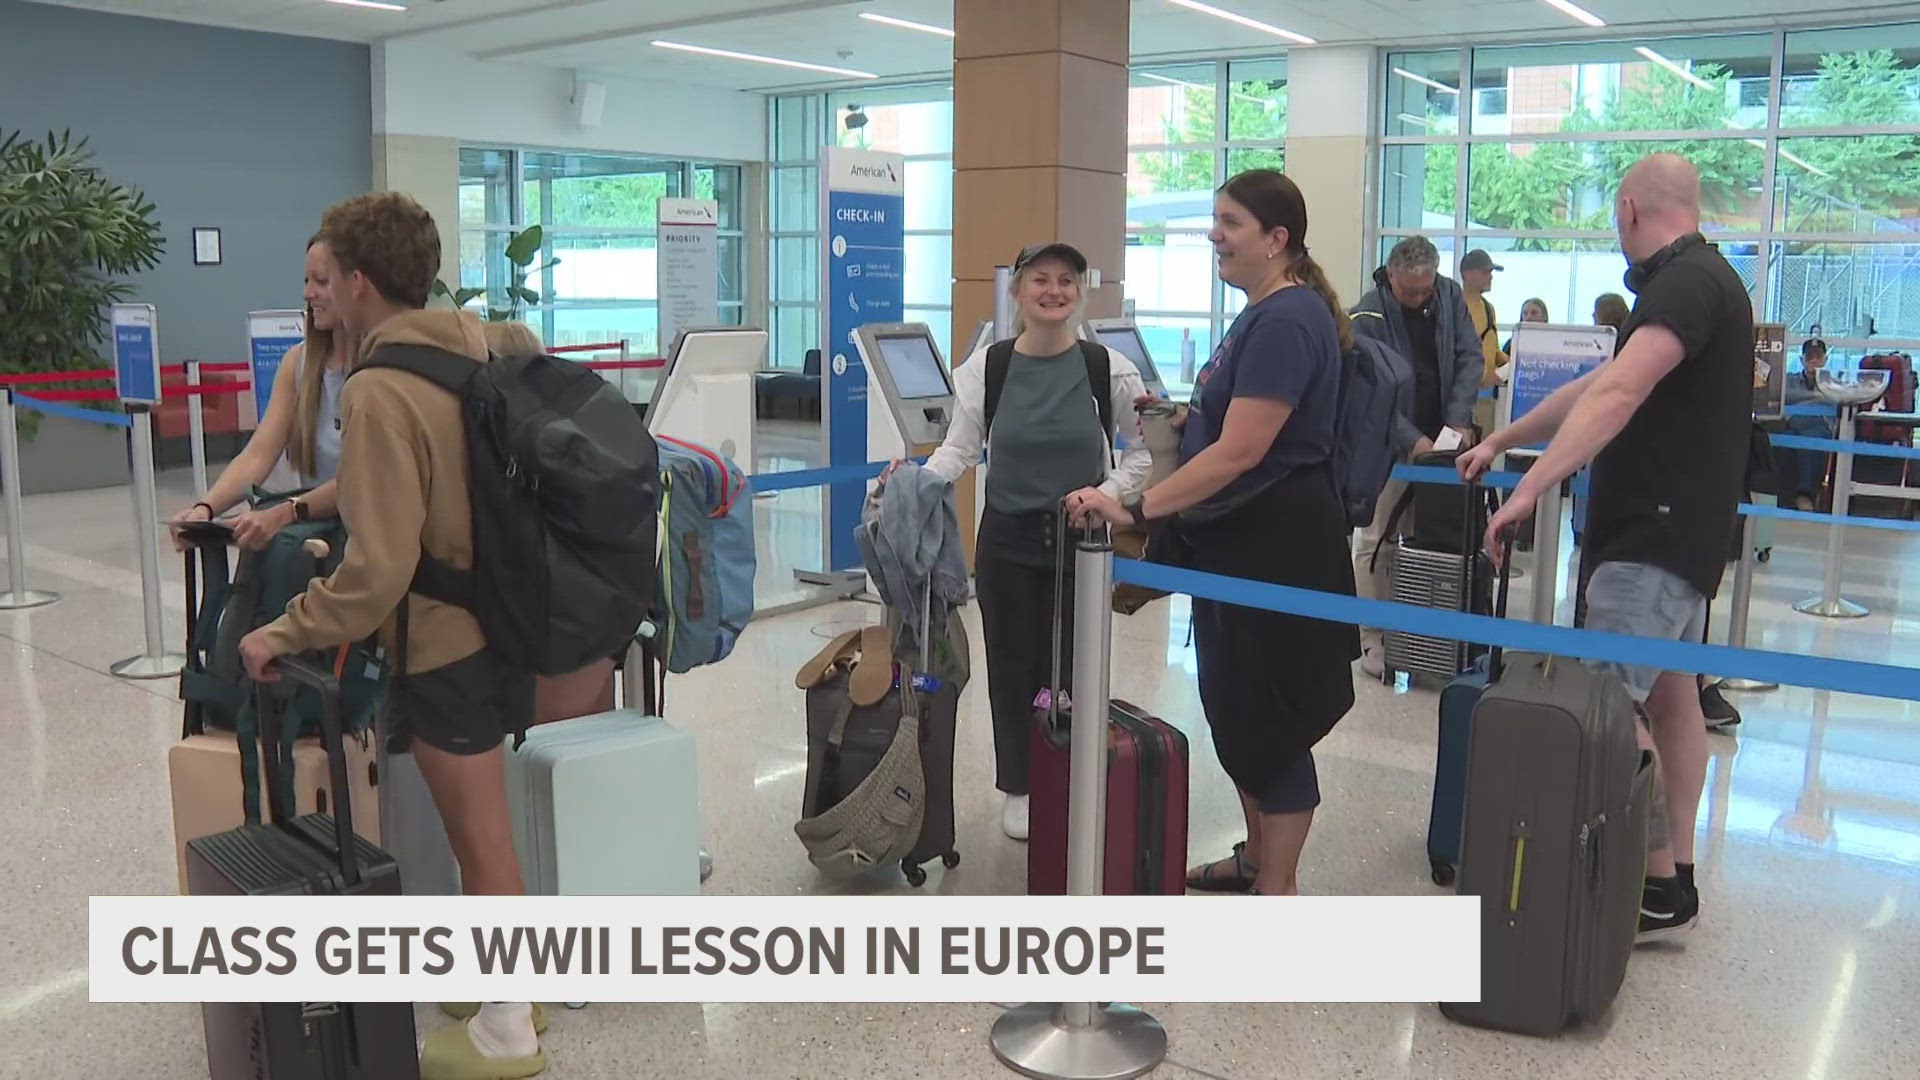 One local teacher is giving her students a firsthand history lesson on World War II through a four-country trip across Europe.